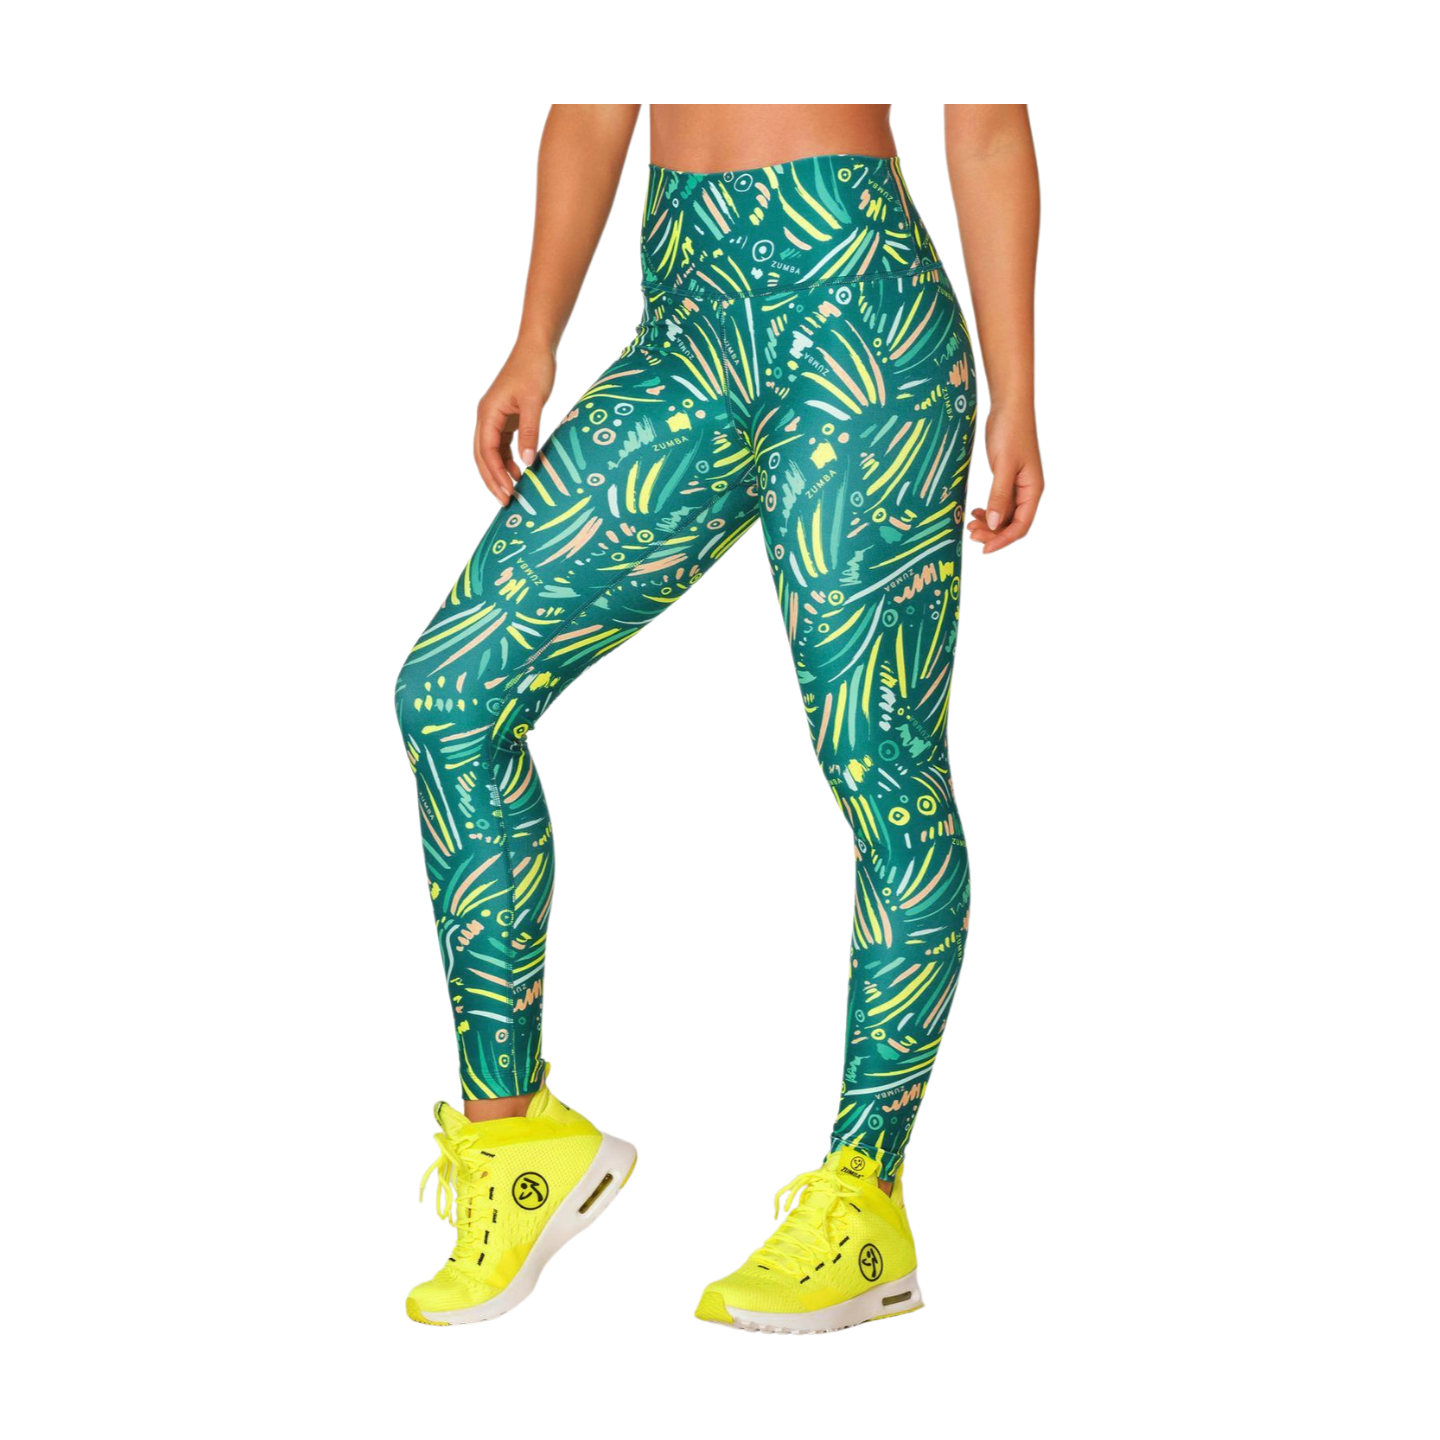 Zumba Transform High Waisted Ankle Leggings (Special Order)